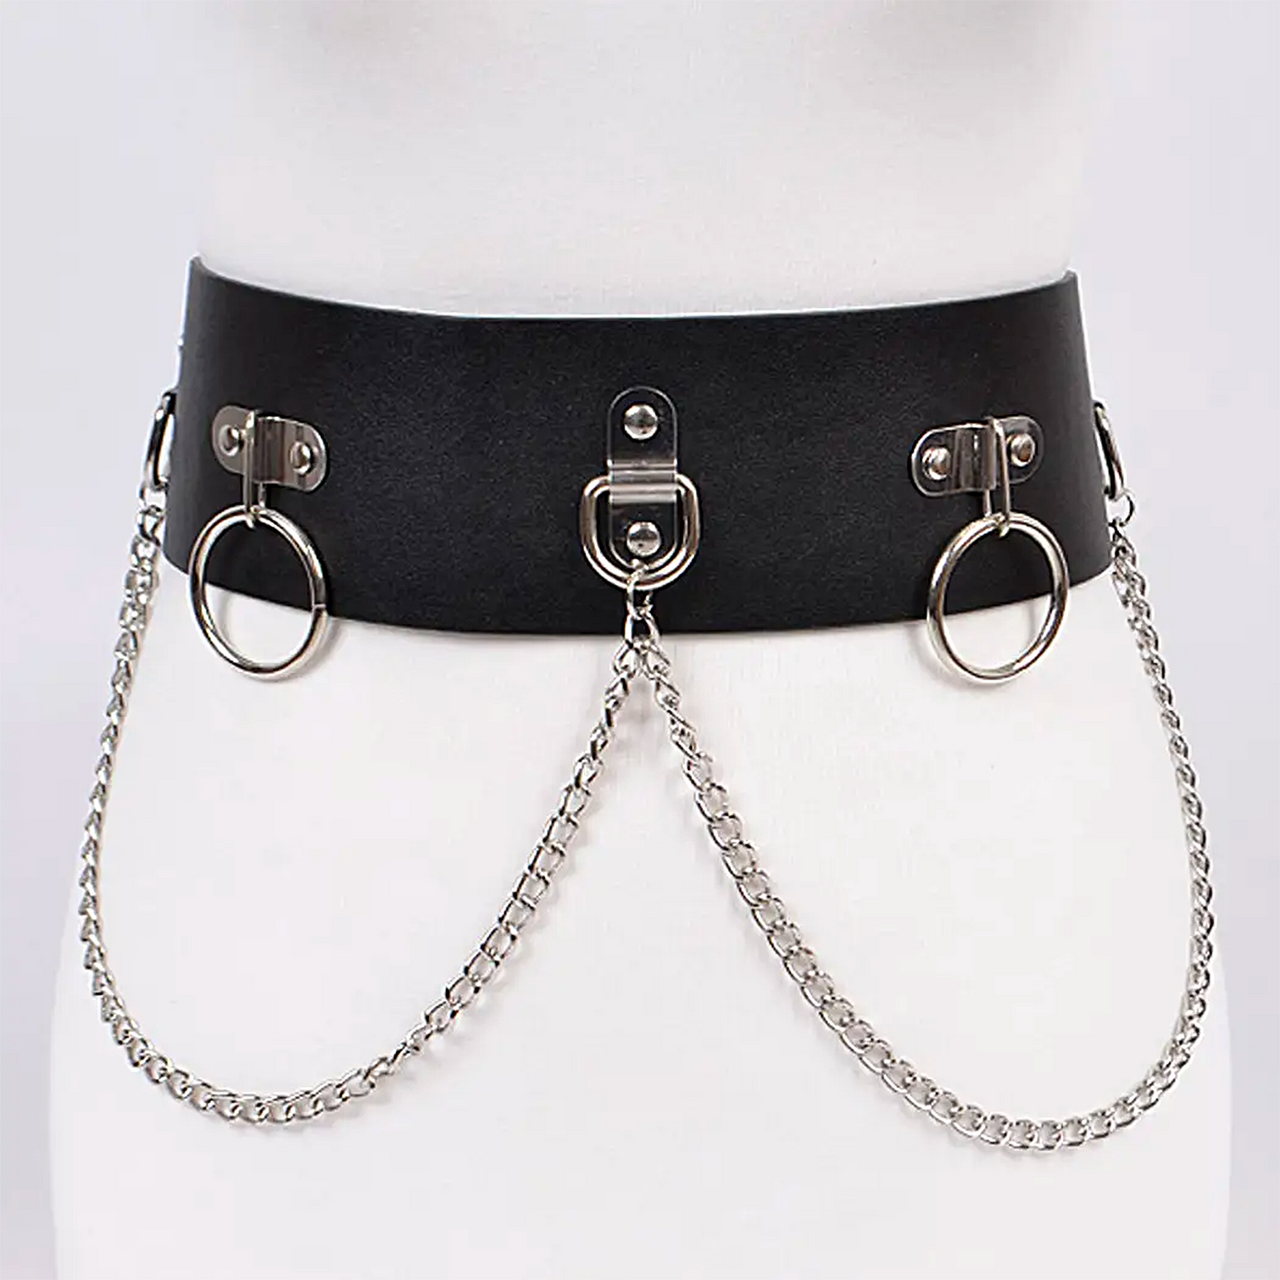 RINGS AND CHAINS WIDE VEGAN BELT